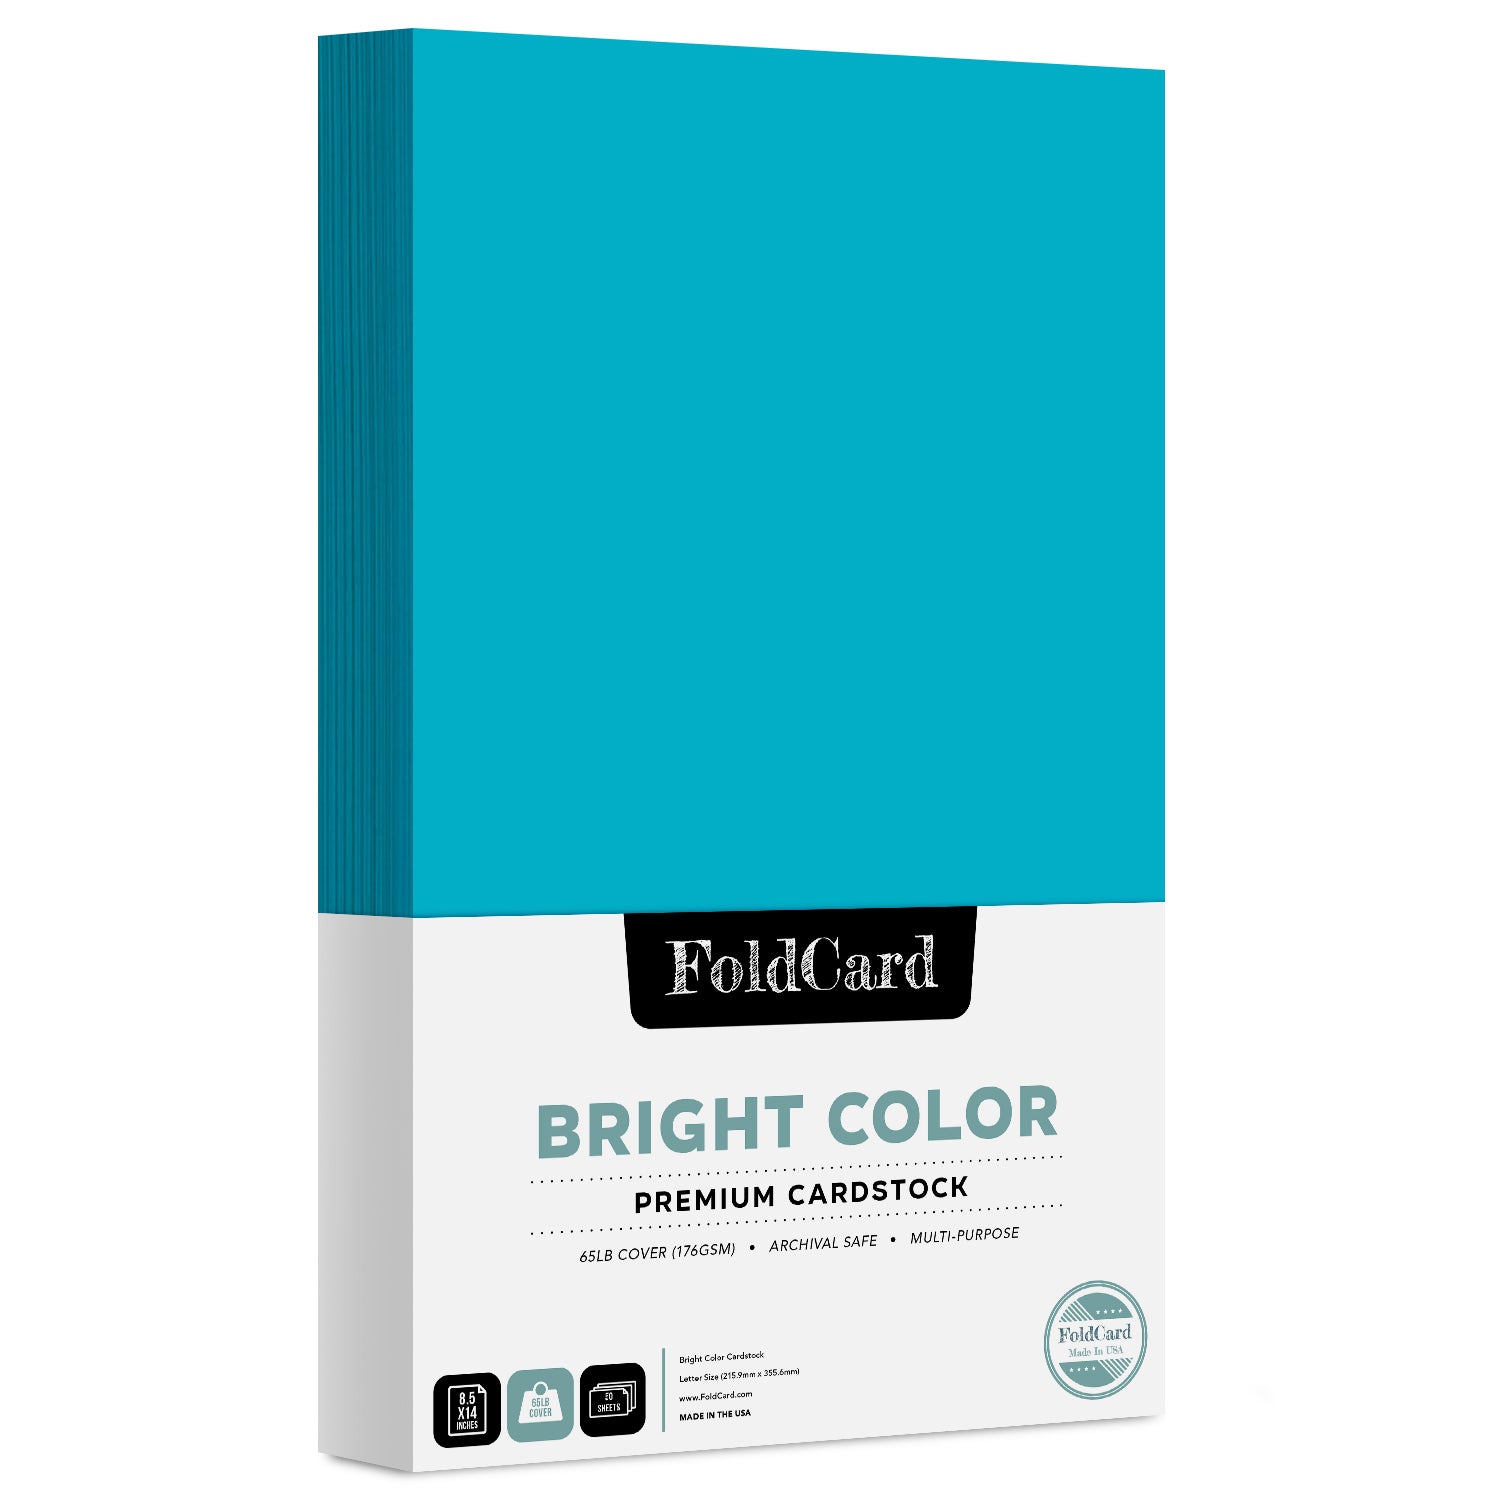 Vibrant Bright Color Cardstock for DIY Art Projects - 8.5x14 50 Sheets